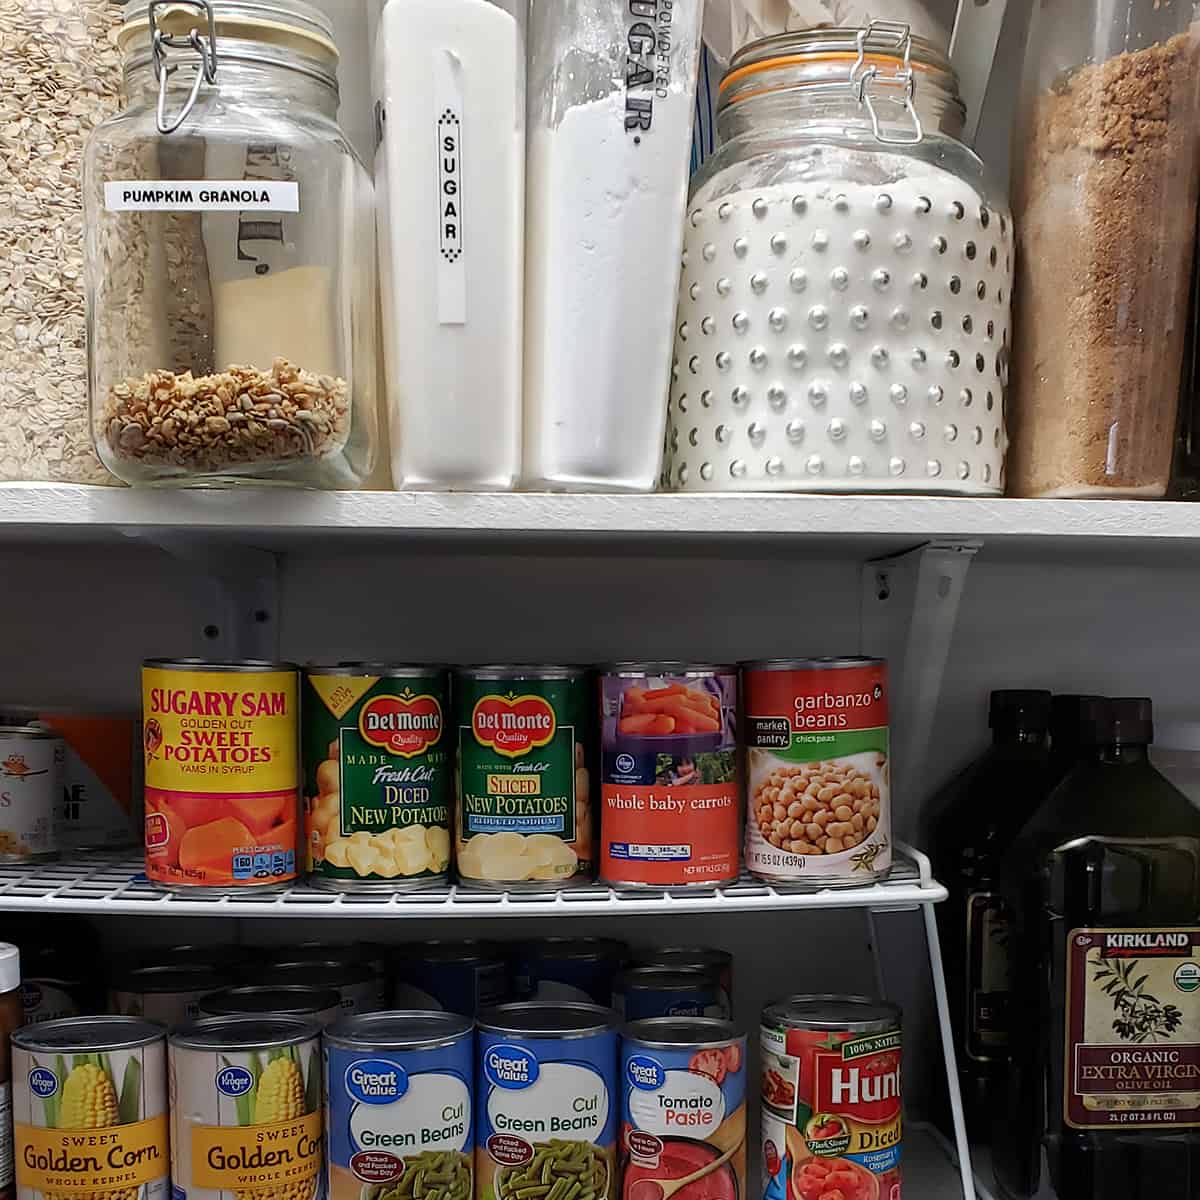 Pantry shelves stocked with food